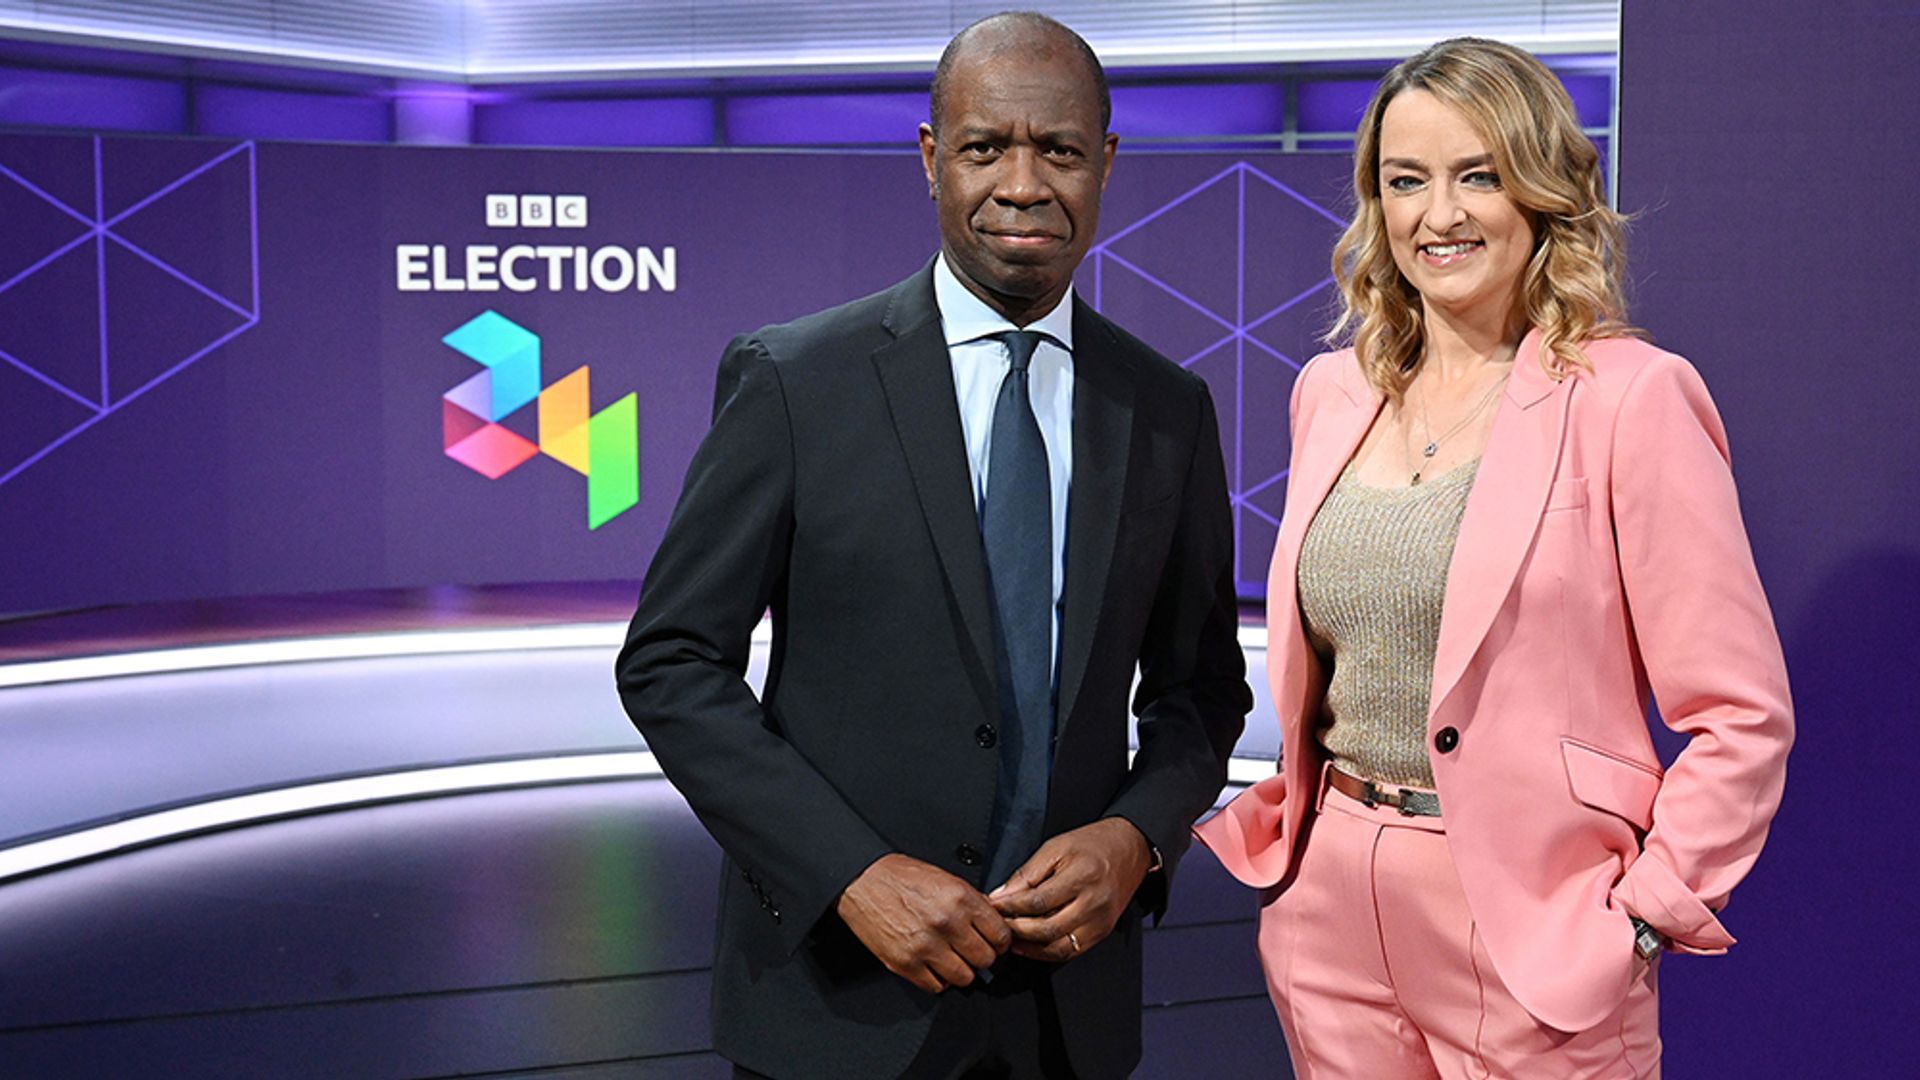 Laura Kuenssberg with Clive Myrie